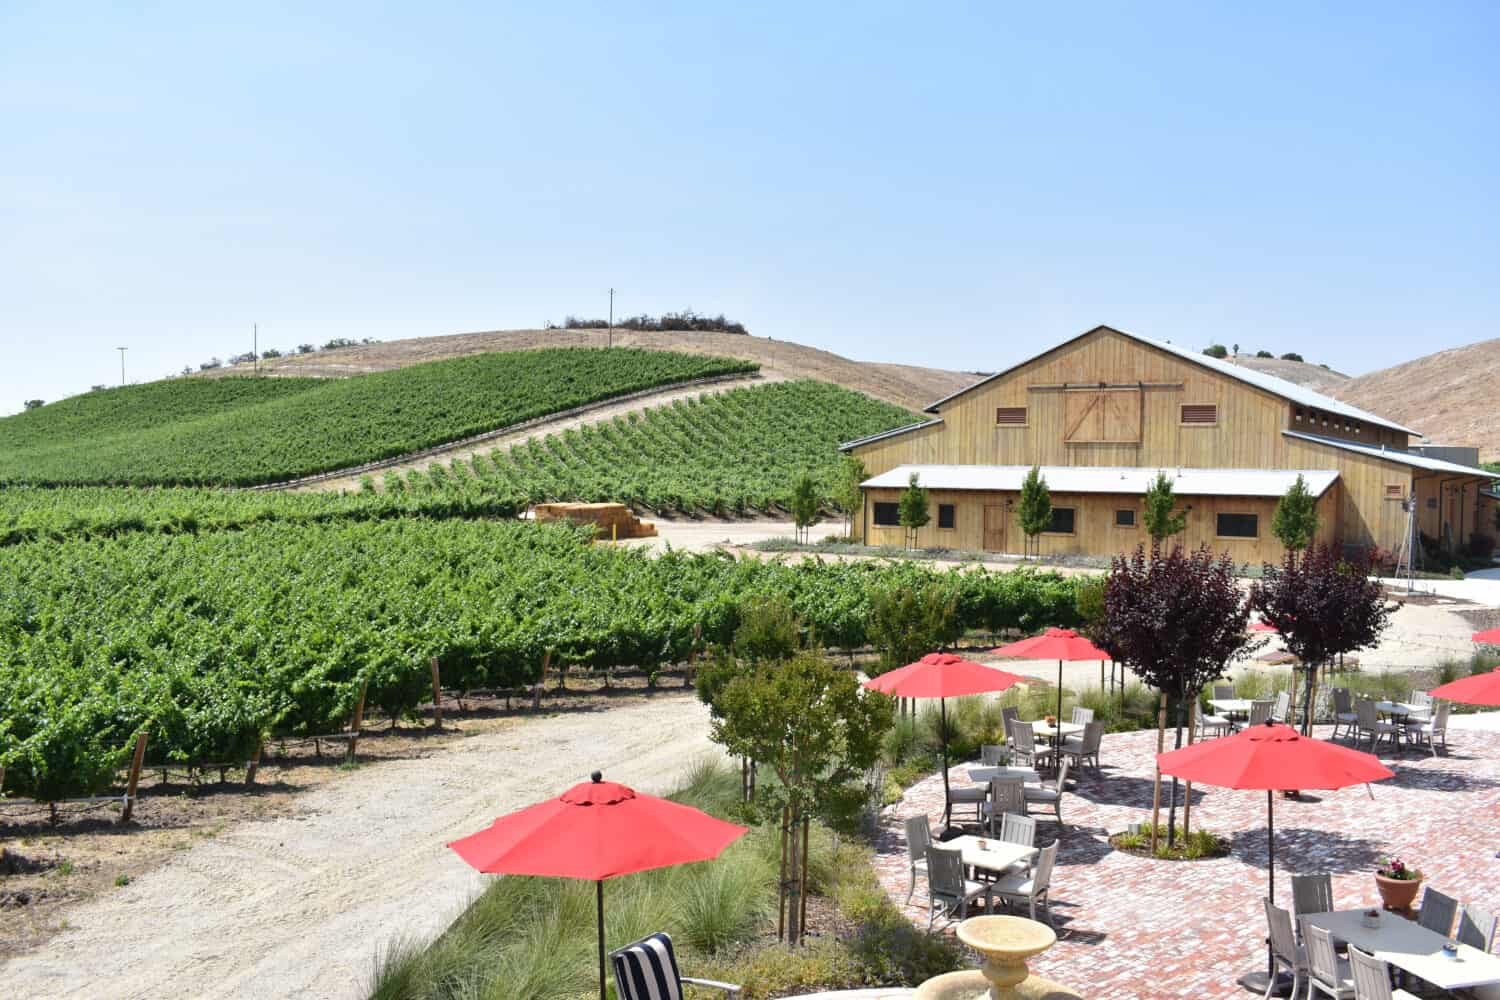 A view of a lush green vineyard in rolling hills at an upscale winery in Paso Robles, California